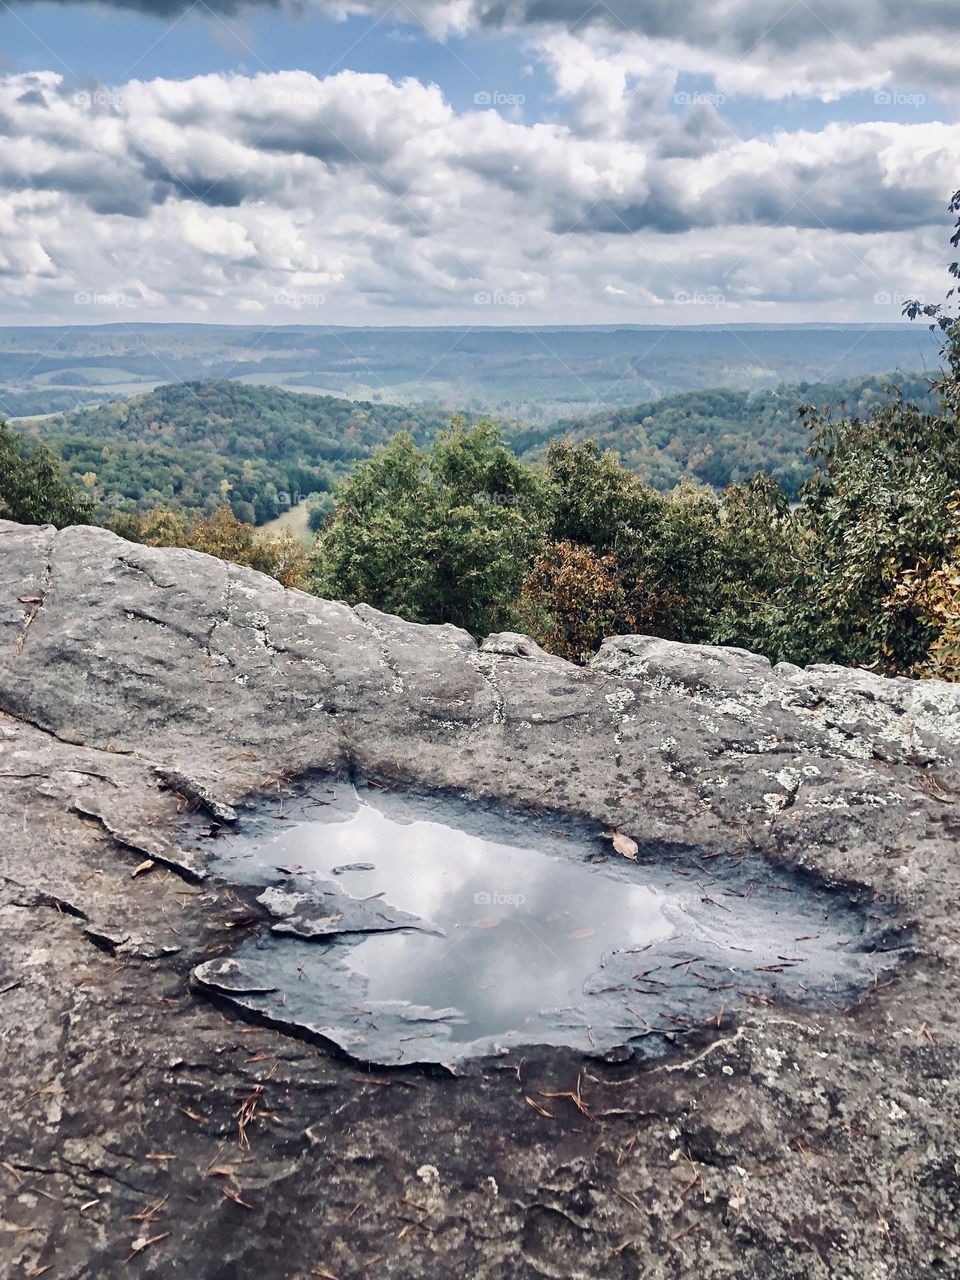 View from a rain soaked rocky crag in the foothills of the Appalachian mountains of the United States.